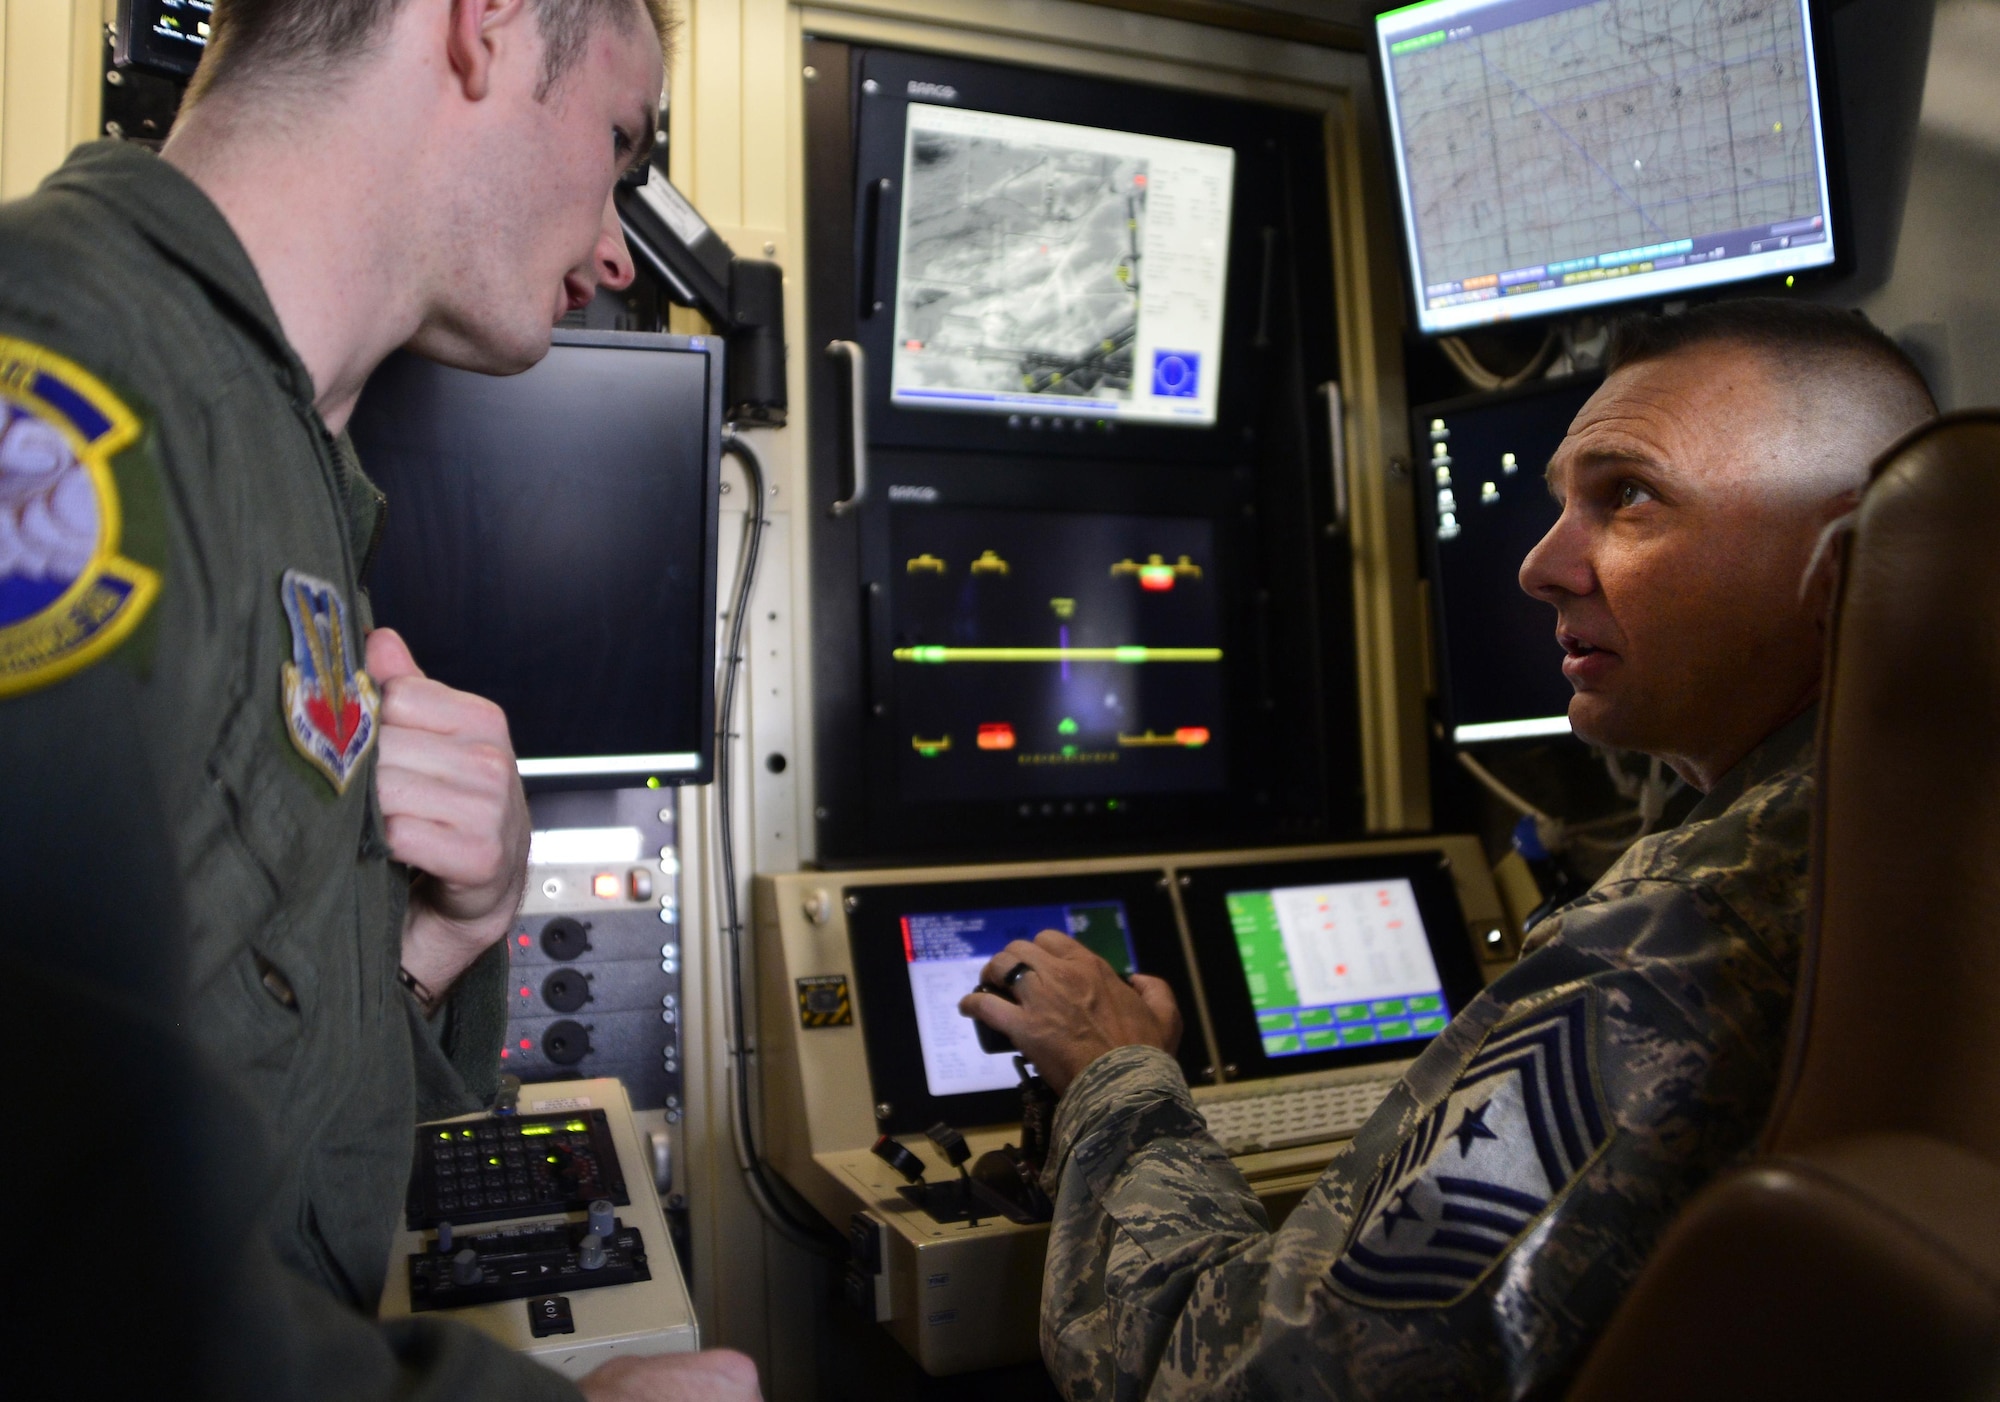 Senior Airman Jacob, 22nd Reconnaissance Squadron sensor operator, explains his job to Chief Master Sgt. Michael Ditore, 432nd Wing/432nd Air Expeditionary Wing command chief April 1, 2016 at Creech Air Force Base, Nevada. Jacob showed the chief how a sensor operator completes the mission by operating the multi-spectral targeting system. (U.S. Air Force photo by Senior Airman Christian Clausen/Released)